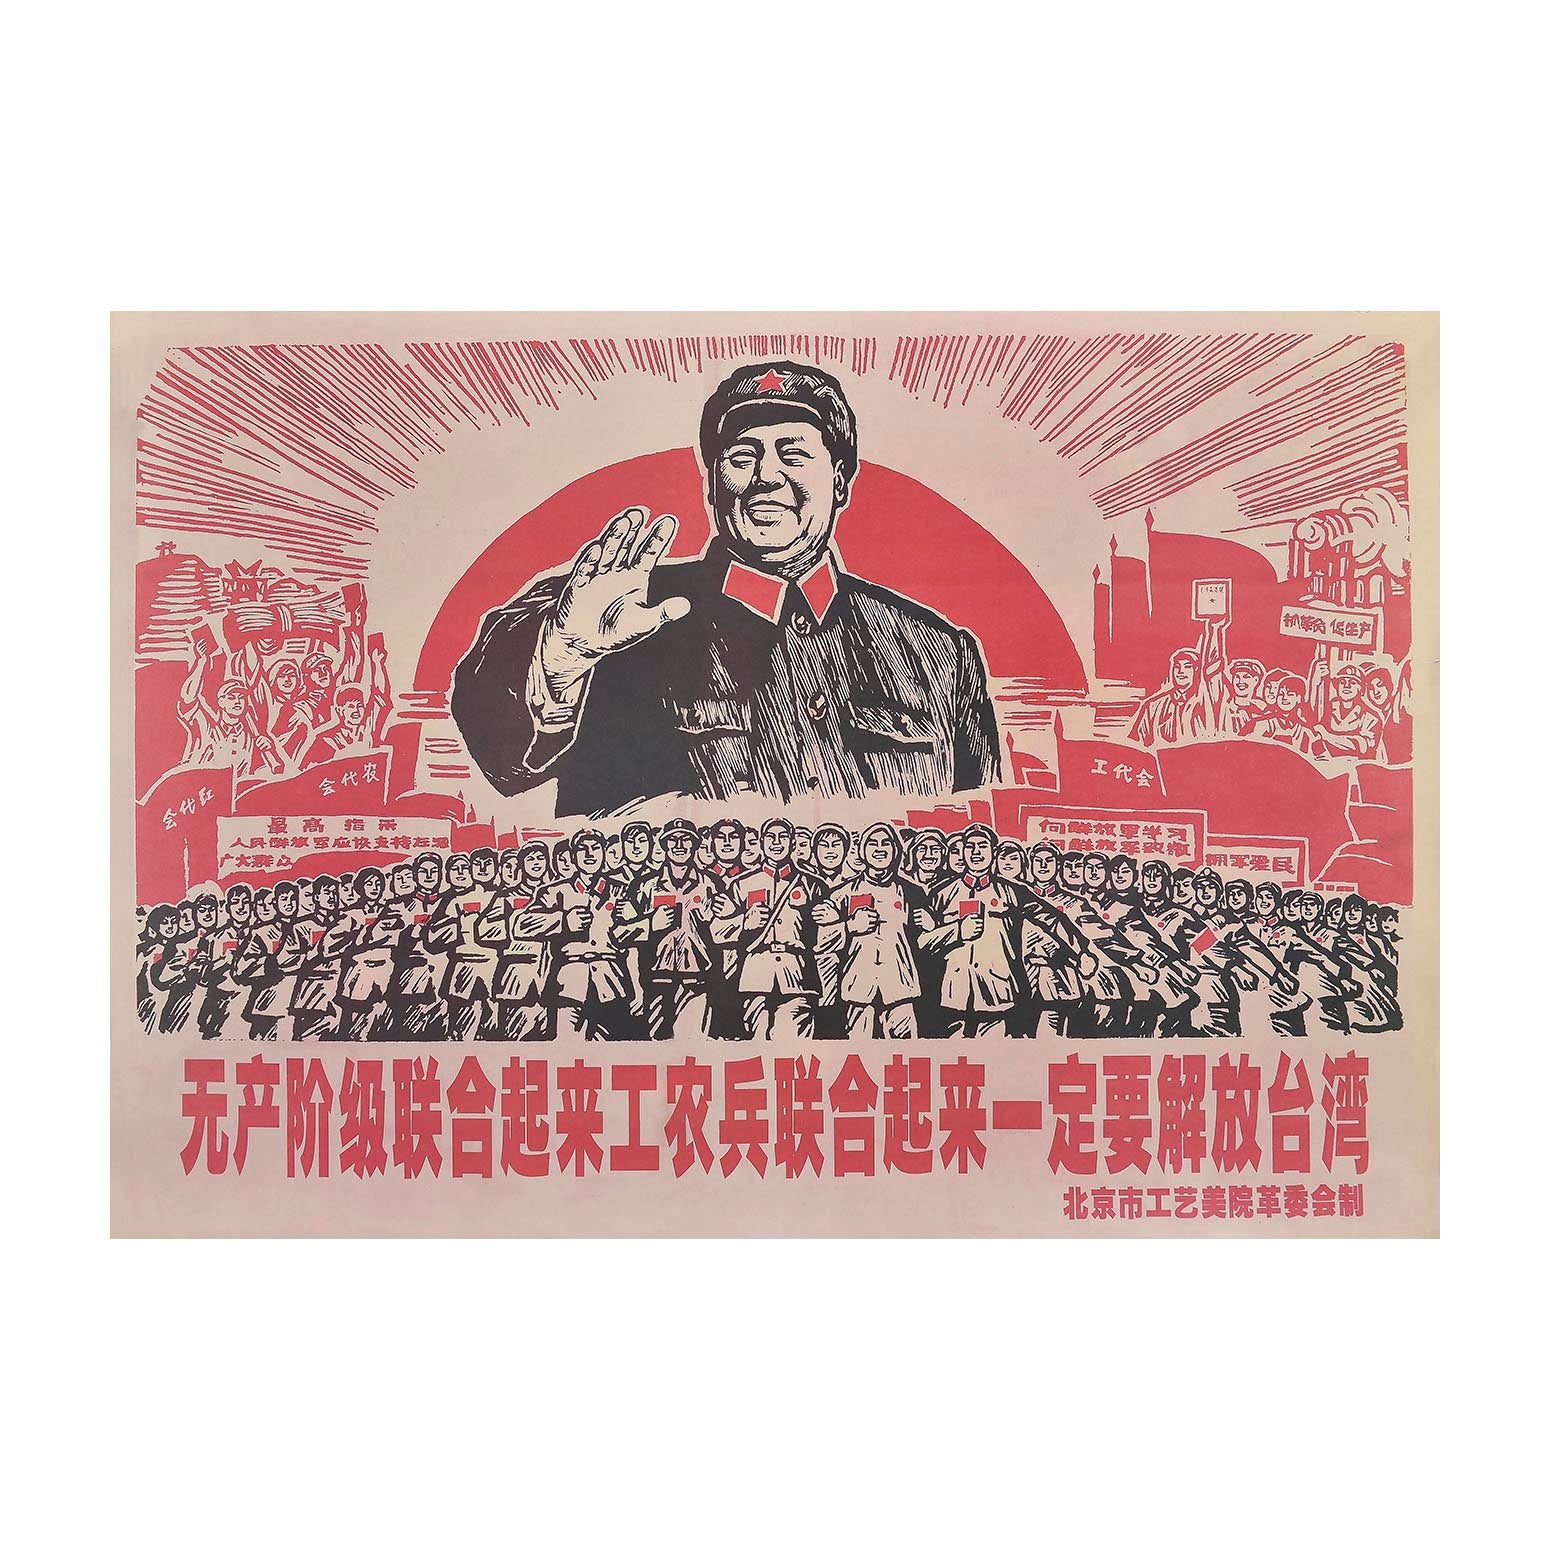 Original Chinese Communist Party poster, c. 1970. The image depicts Chairman Mao against a sunrise illuminating various Chinese workers proudly carrying their copies of Quotations from Chairman Mao Tse-tung (known as ‘The Little Red Book’ in the West).